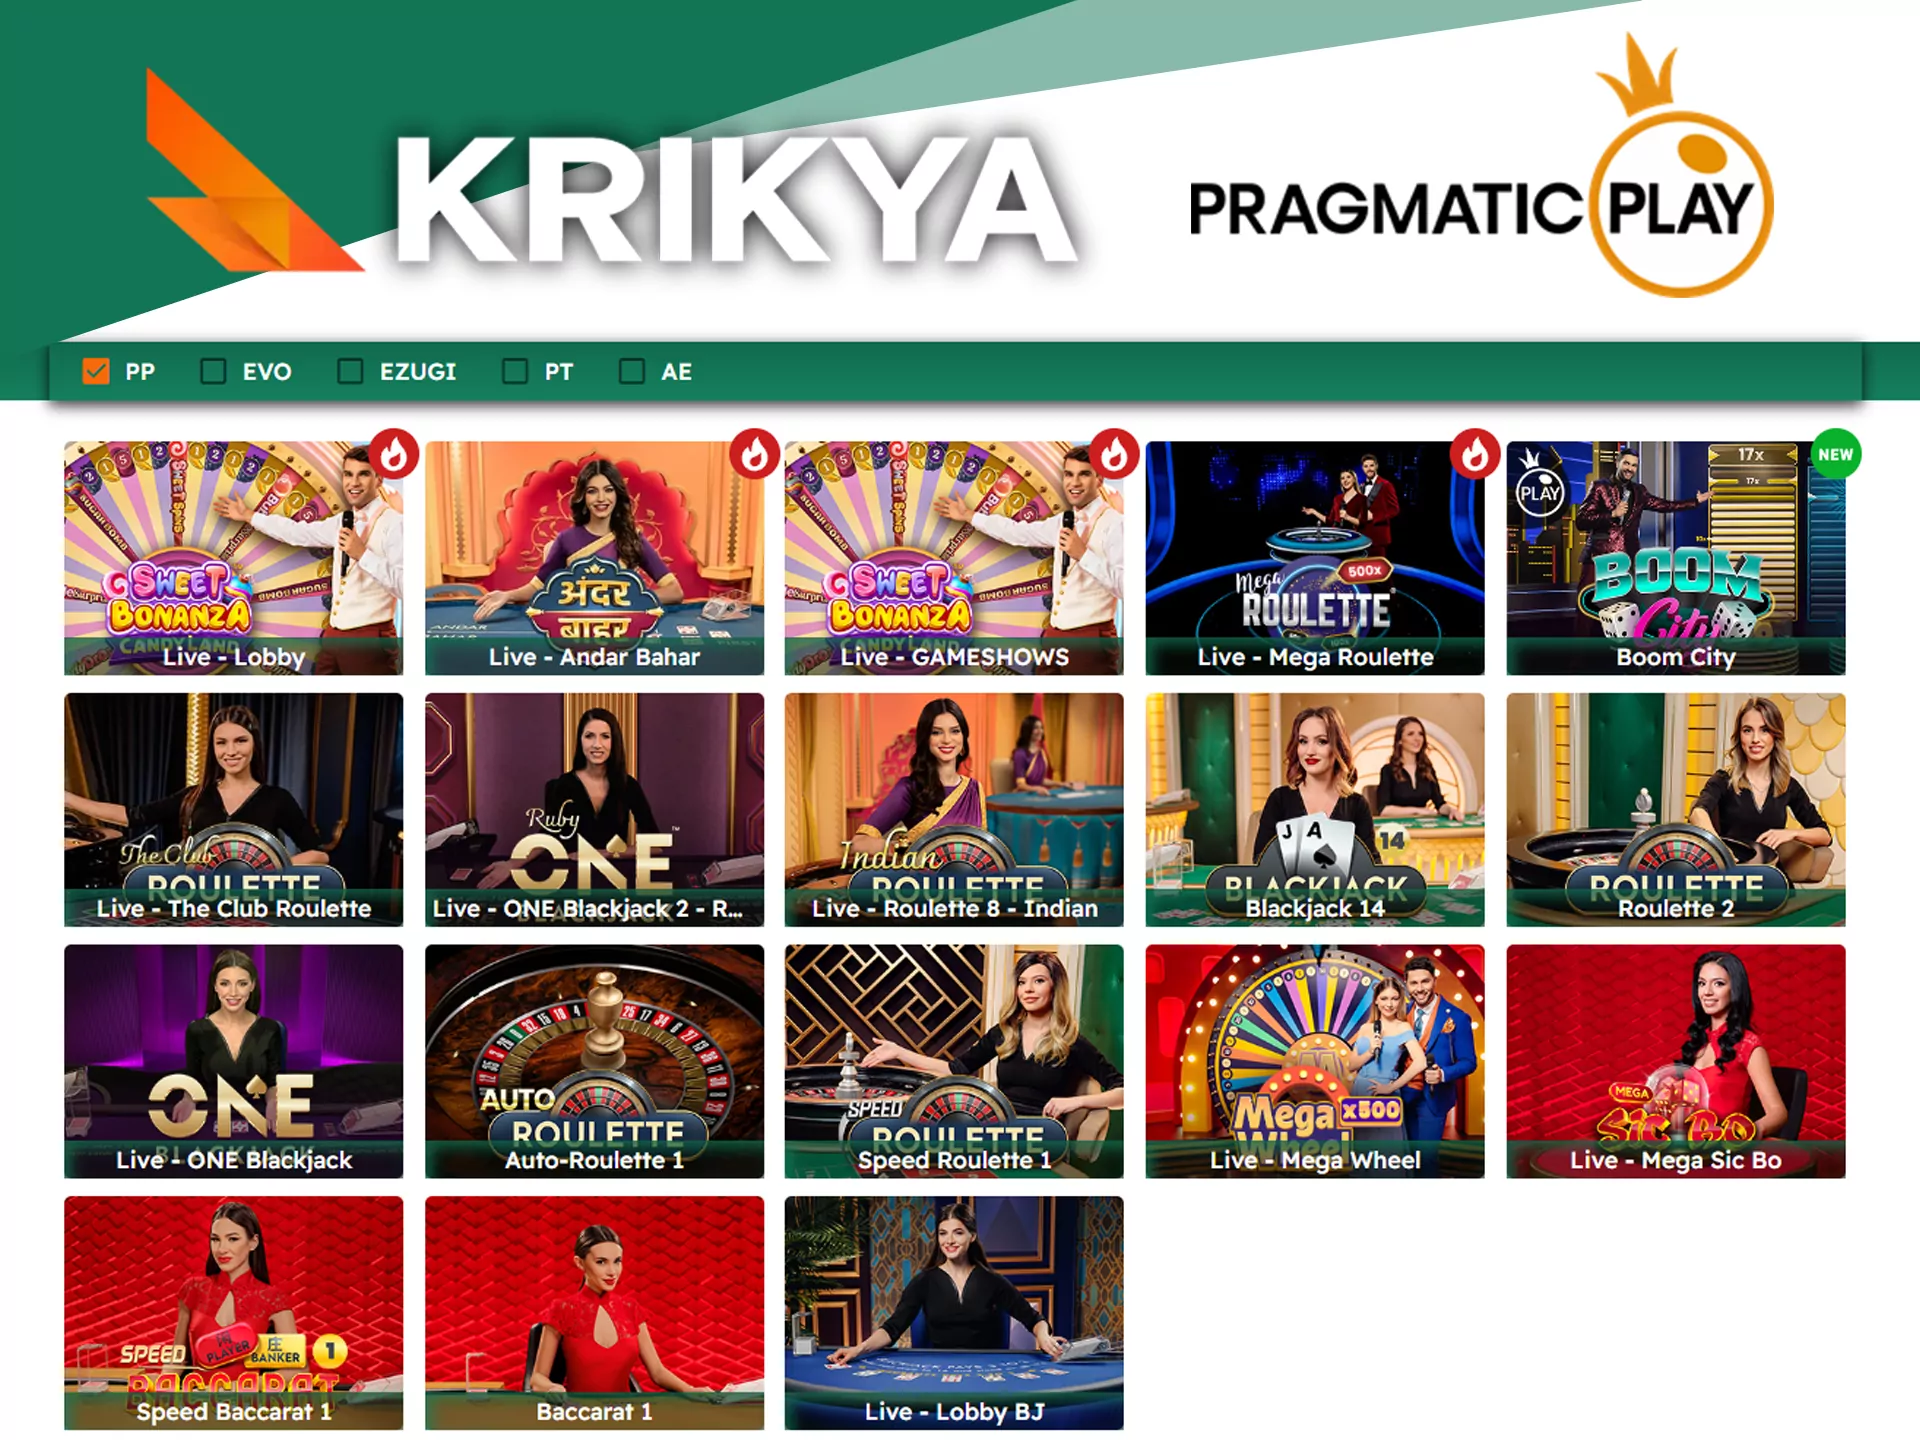 Check for best game shows on the market with Pragmatic Play.